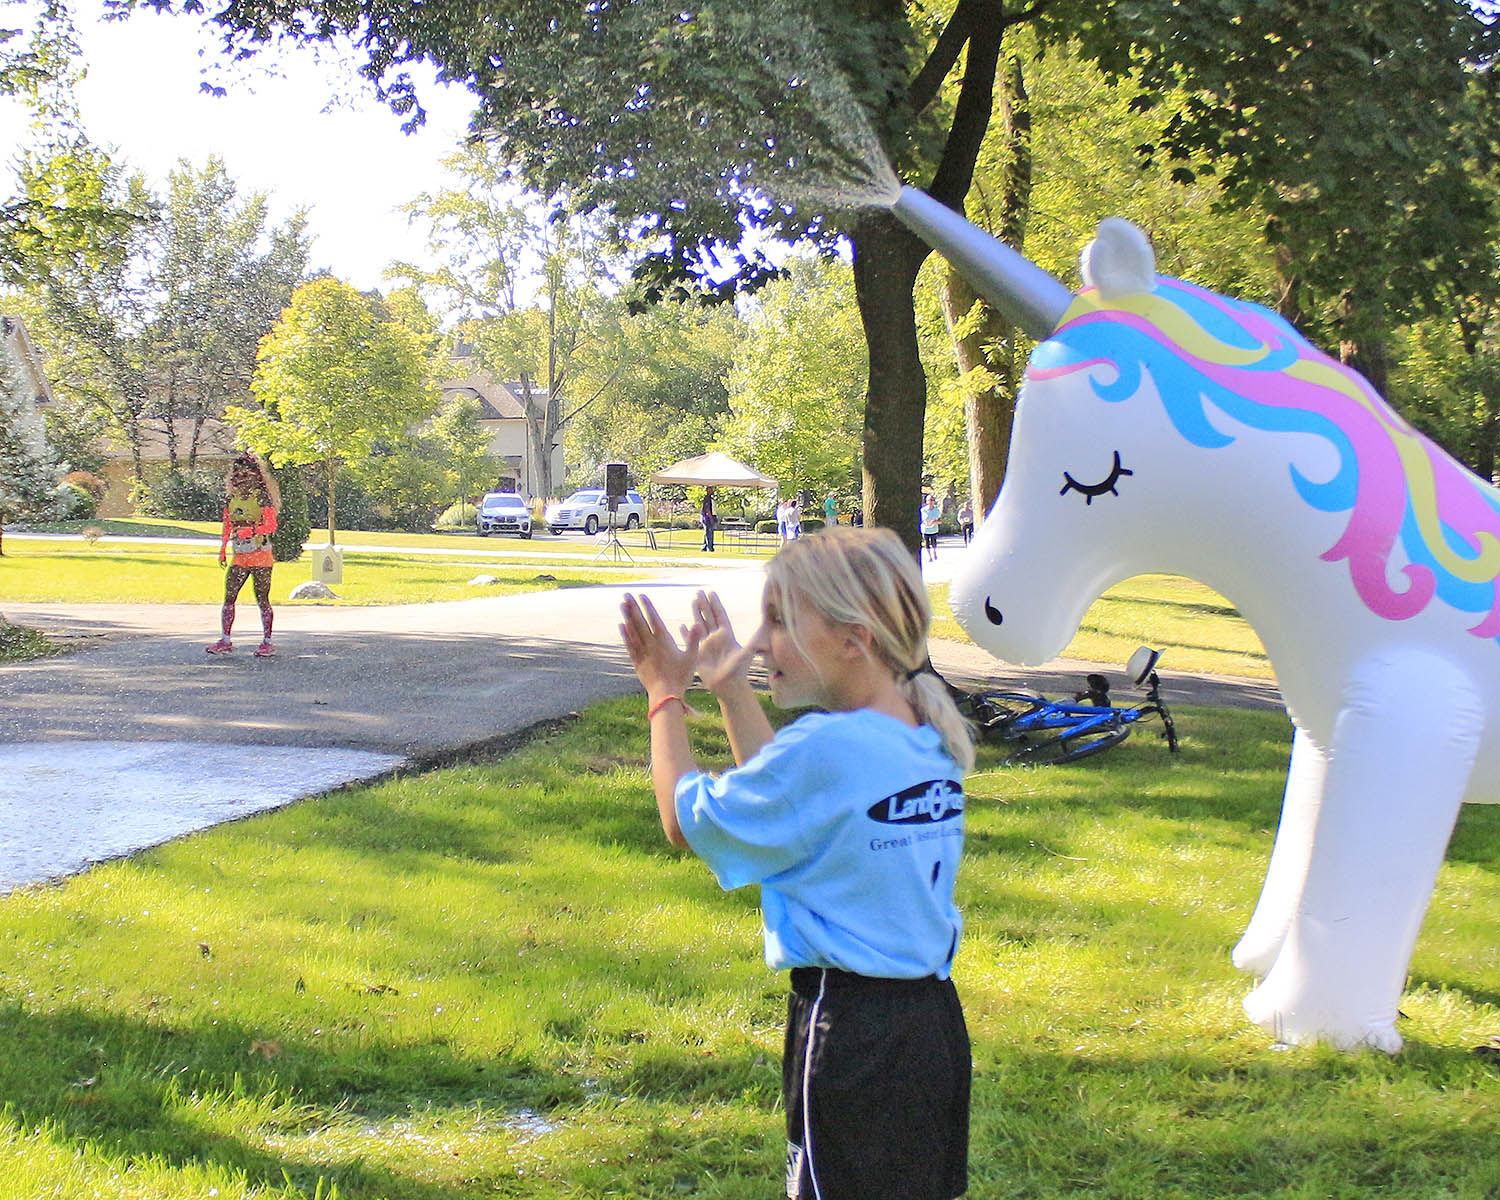 Georgia Bruni claps as runners pass her home during the 2019 Hidden Gem Half Marathon. She and her mom, Jeanette Bruni, set up a unicorn water spray to cool off runners. (Chronicle file photo)